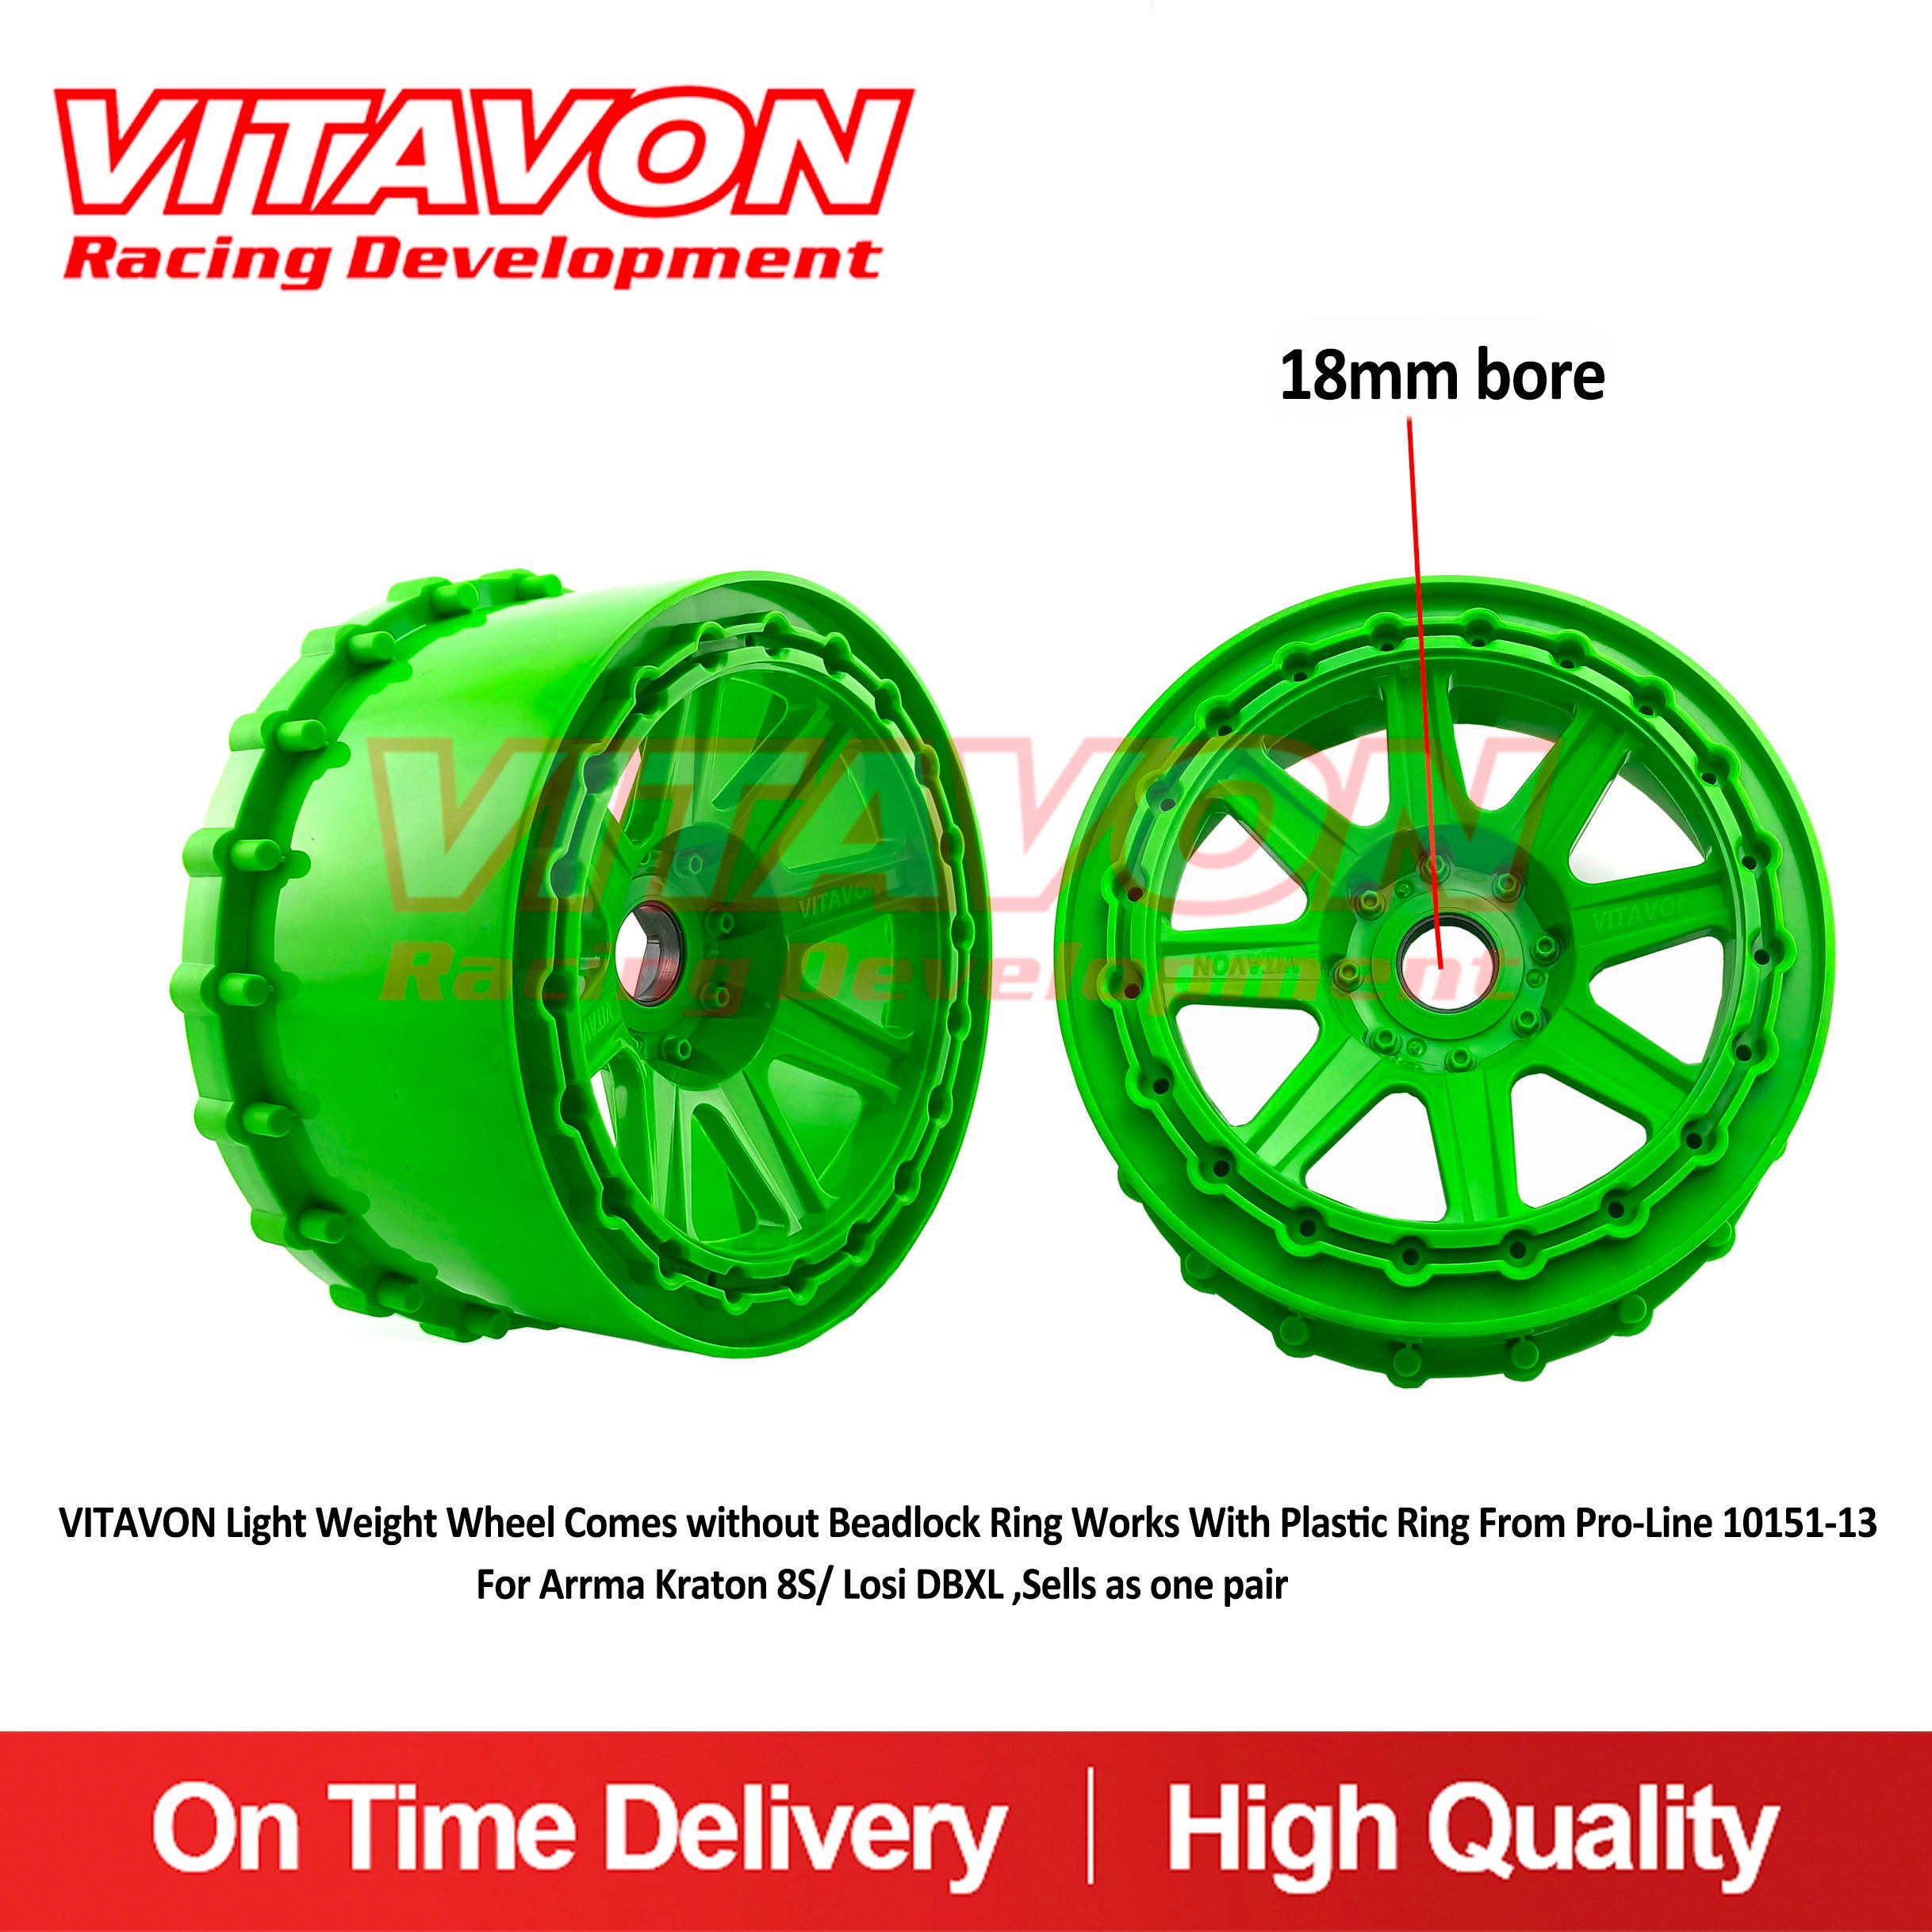 VITAVON Light Weight Wheel Comes without Beadlock Ring Works With Plastic Ring From Pro-Line 10151-13 For Arrma Kraton 8S/ Losi DBXL ,Sells as one pair